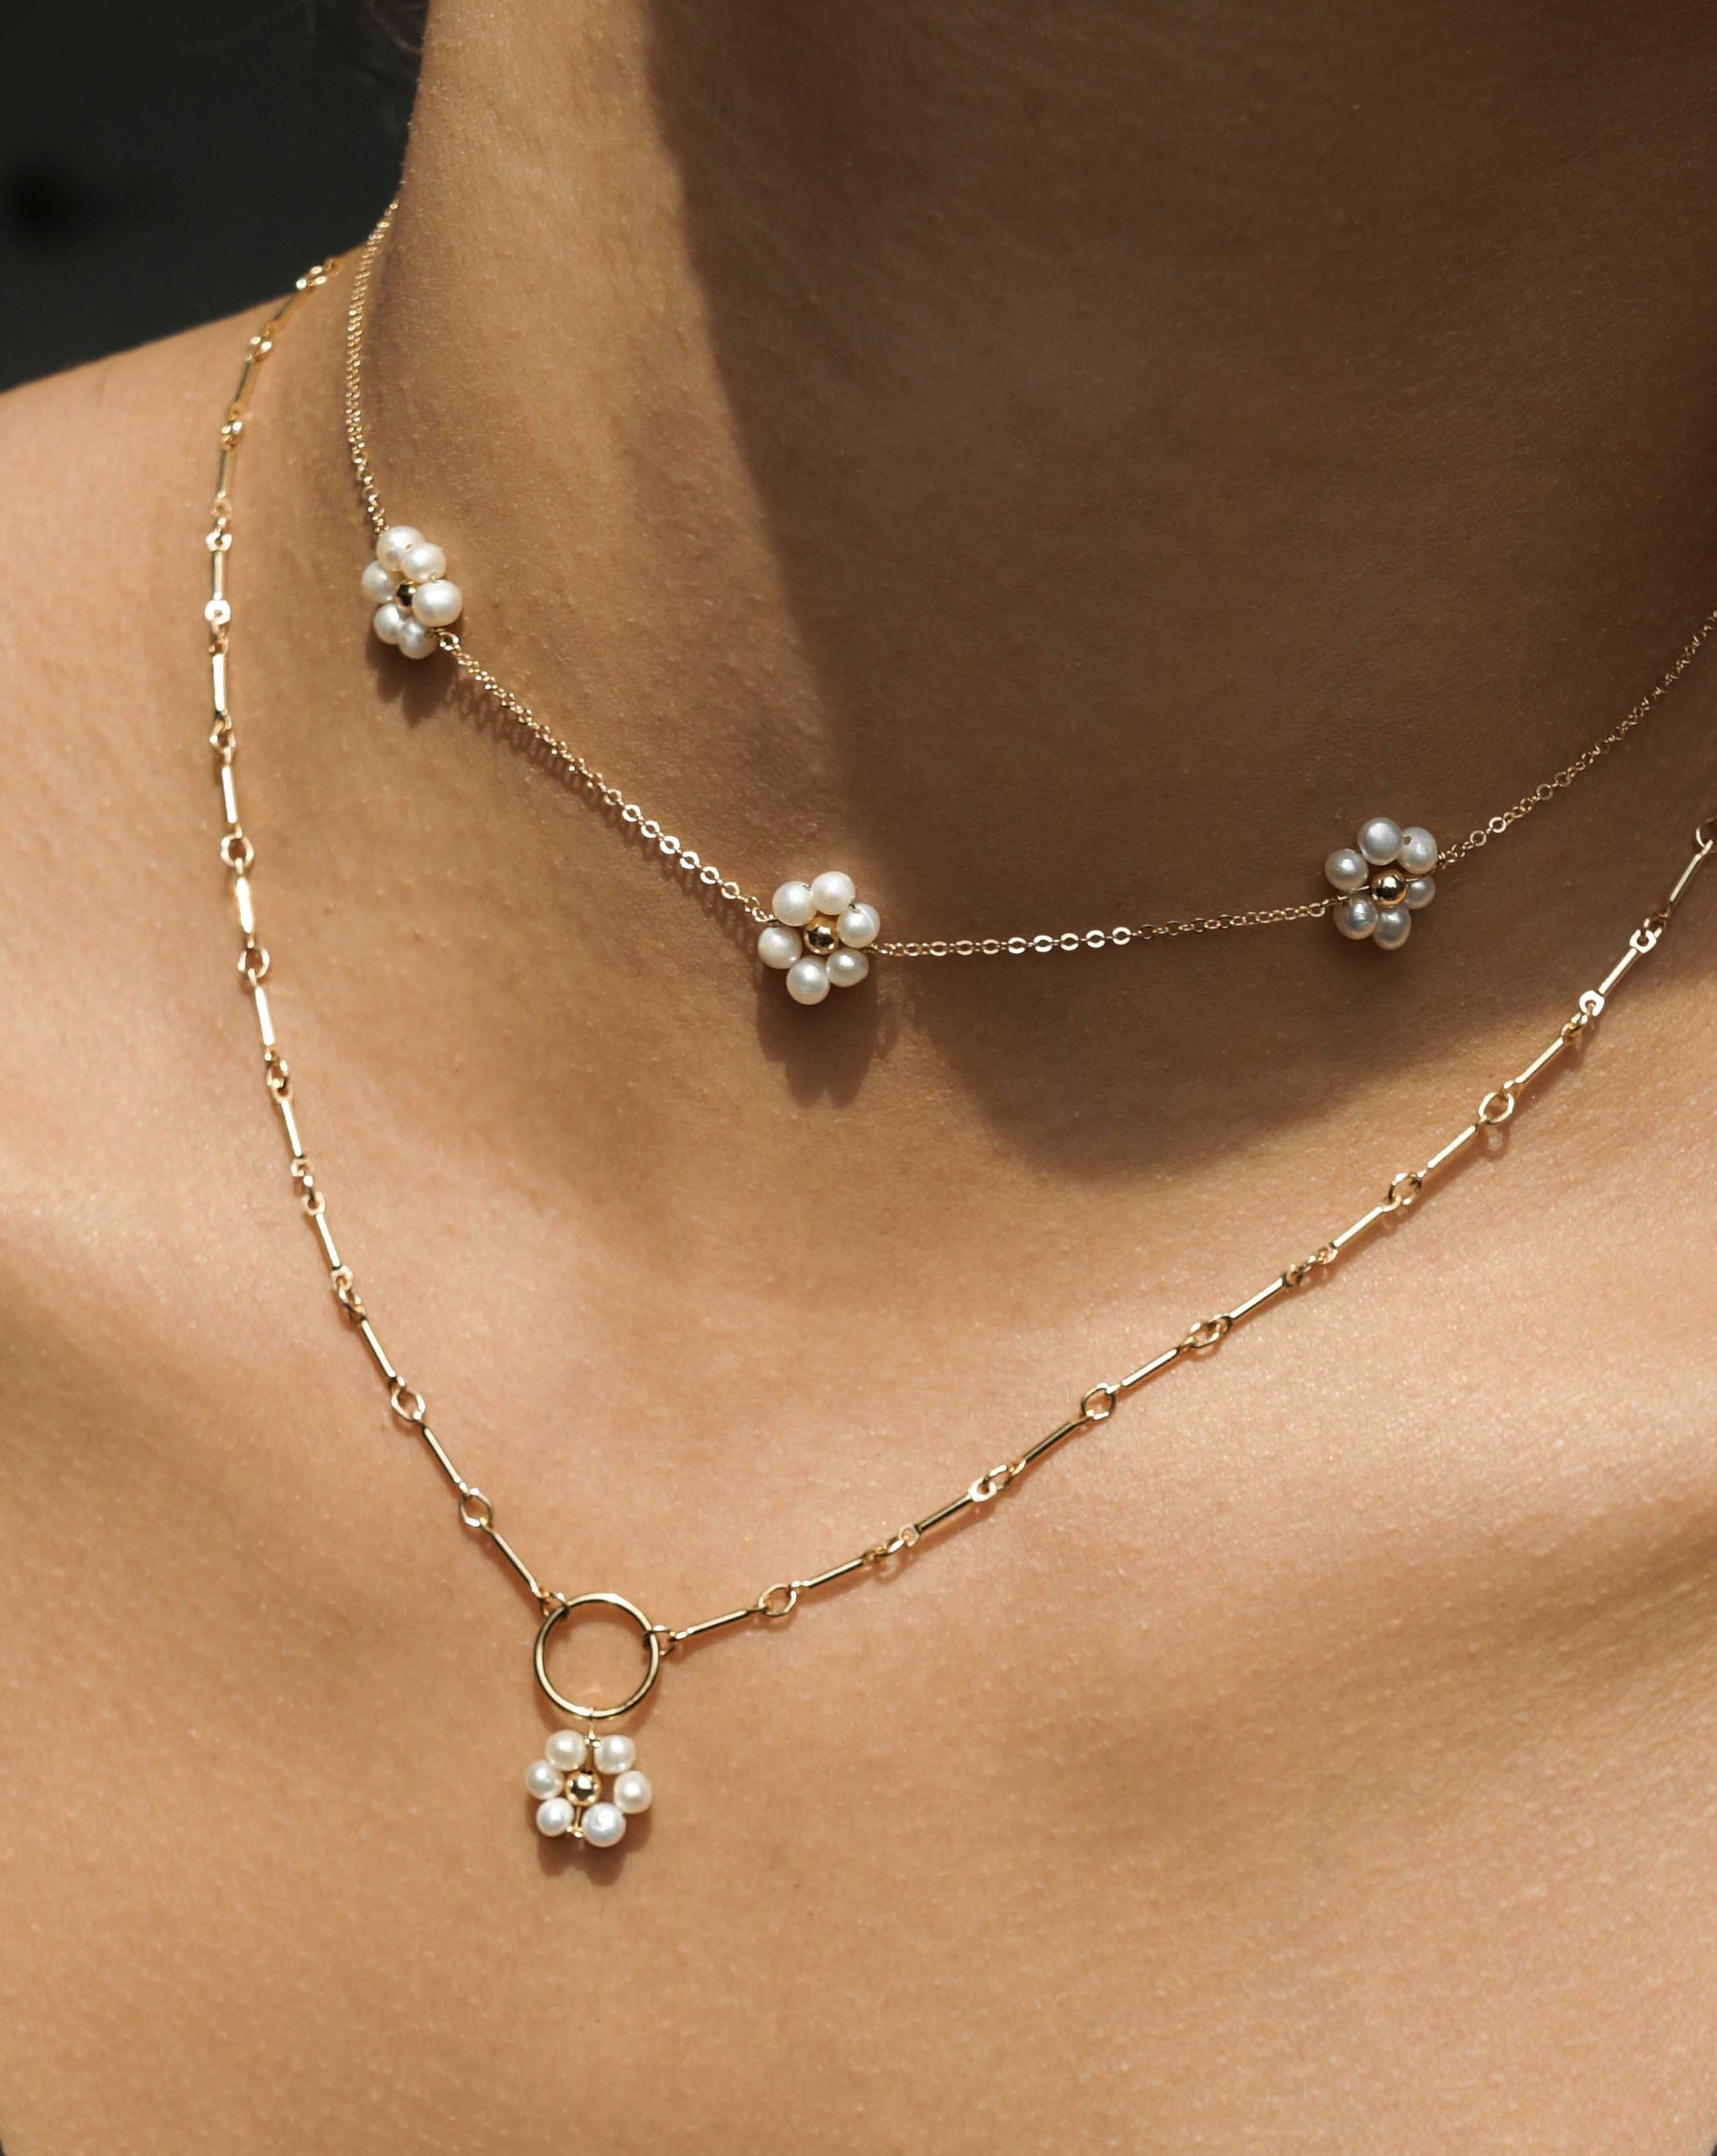 Flor Del Sol Necklace by KOZAKH. A 16 to 18 inch adjustable length necklace in 14K Gold Filled, featuring 3mm Freshwater Pearls in form of a daisy.